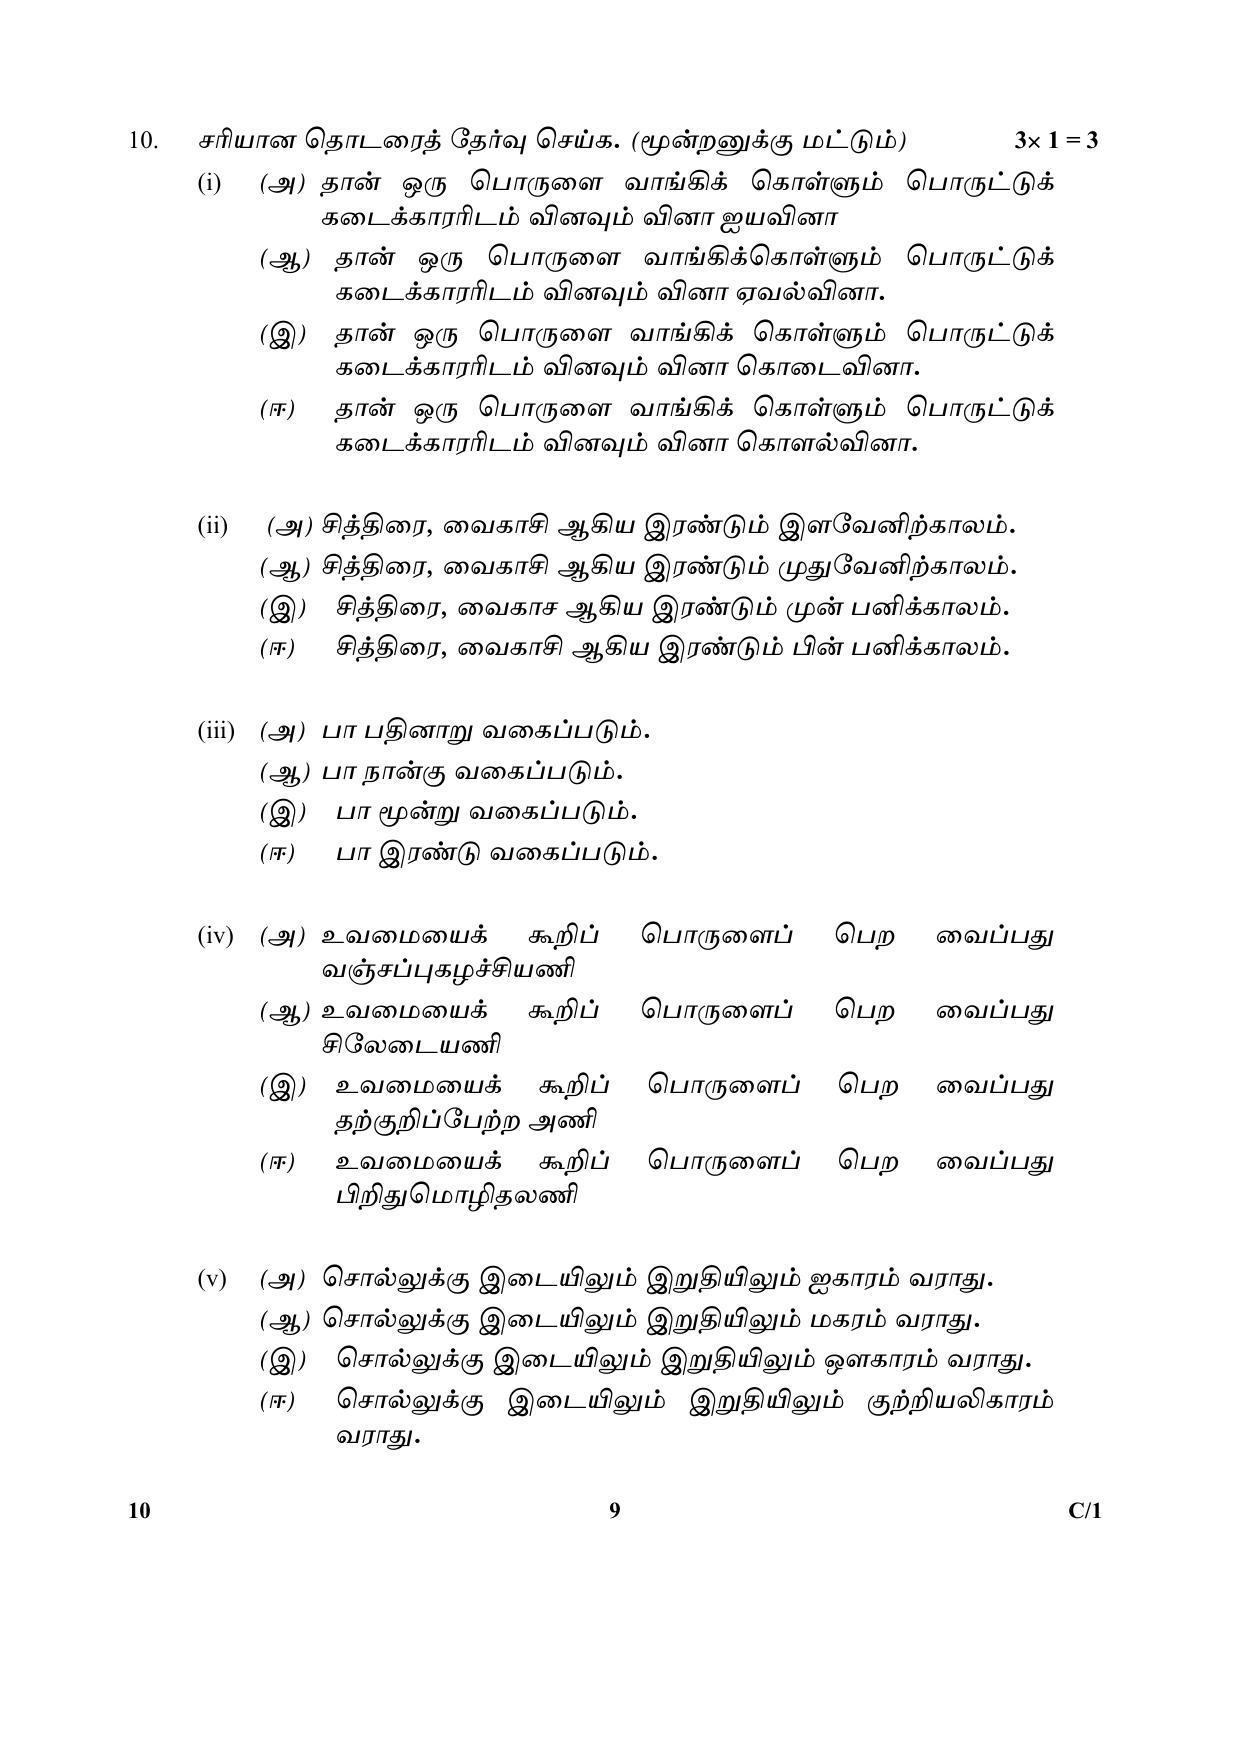 CBSE Class 10 10 (Tamil) 2018 Compartment Question Paper - Page 9